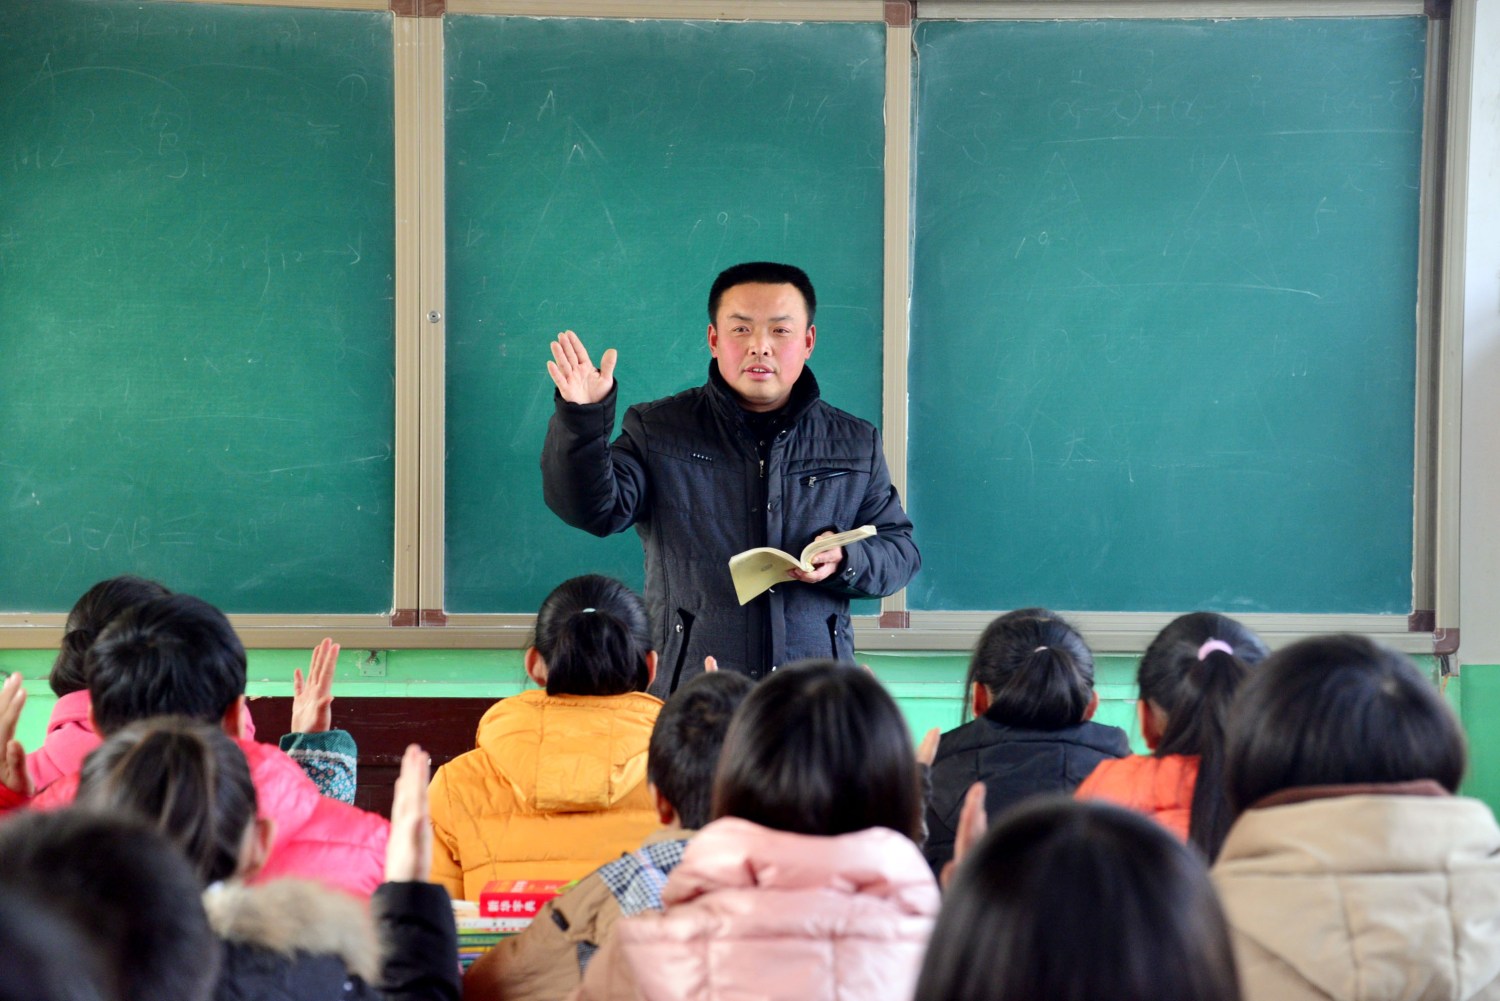 --FILE--A male Chinese teacher gives a lesson to his students in a classroom at a junior high school in Shiziyuan town, Shenxian county, Liaocheng city, east China's Shandong province, 13 January 2015.Worried that a shortage of male teachers has produced a generation of timid, self-centred and effeminate boys, educators in China are working to reinforce traditional gender roles and values in the classroom. In Zhengzhou, a city on the southern bank of the Yellow River, schools have asked boys to sign petitions pledging to act like "real men". In Shanghai, principals are trying boys-only classes, with courses like martial arts, computer repair and physics. In Hangzhou, in eastern China, educators have started a summer camp called "West Point Boys", complete with taekwon-do classes and the motto: "We bring out the men in boys." Education officials across China are aggressively recruiting male teachers, as the domestic news media warns of a need to "salvage masculinity in schools".No Use China. No Use France.